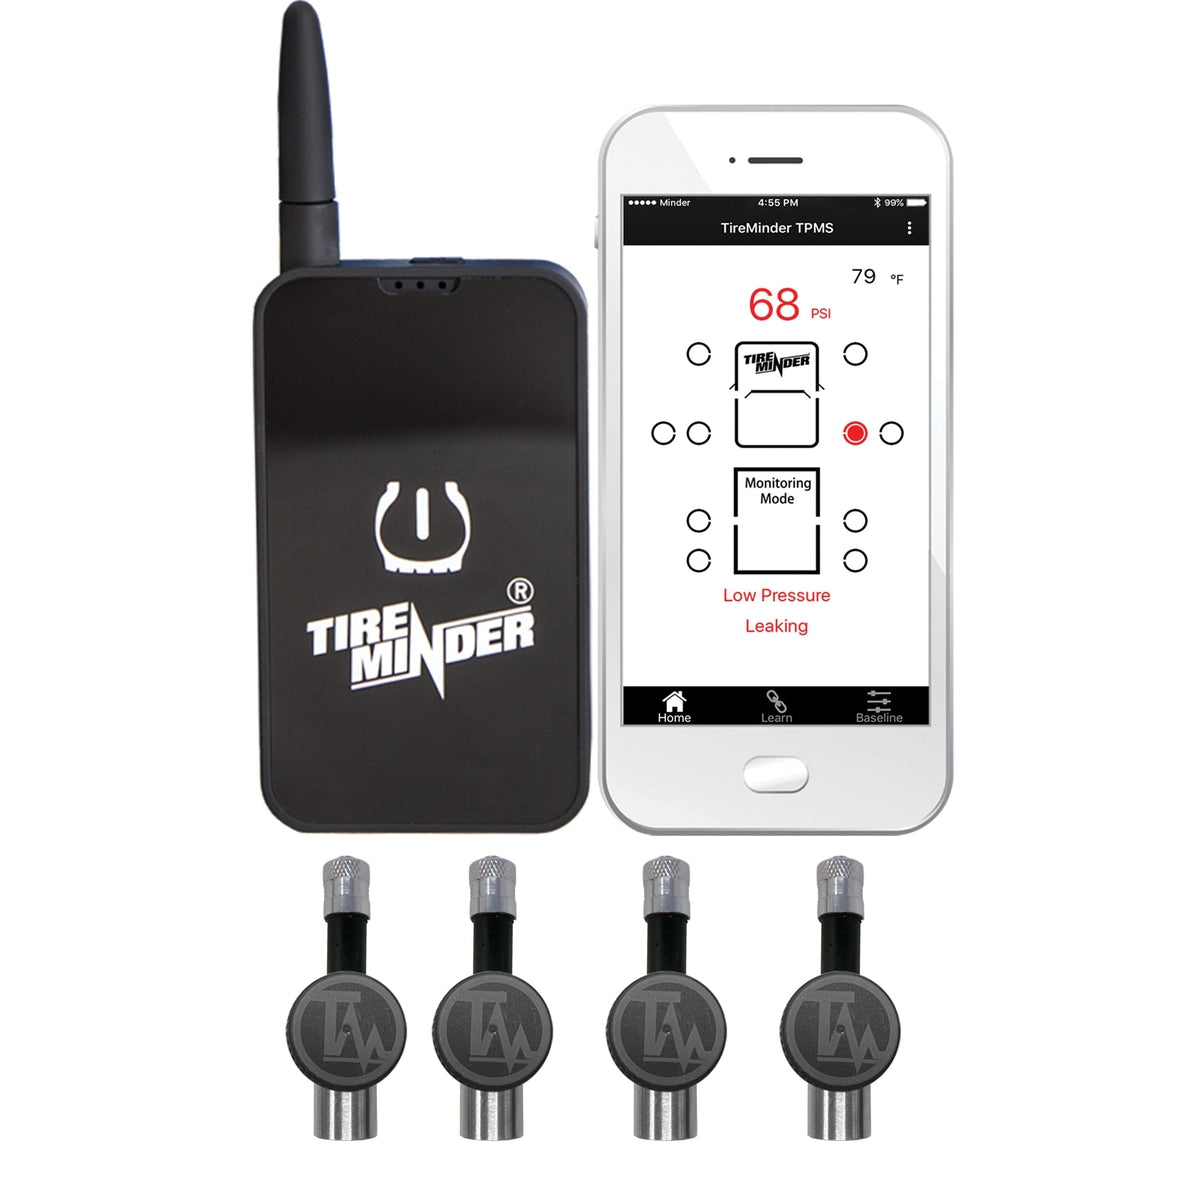 Minder Research Qualifies for Free Shipping Minder TireMinder Smart TPMS with 4 Flow Through Transmitters #TM22159